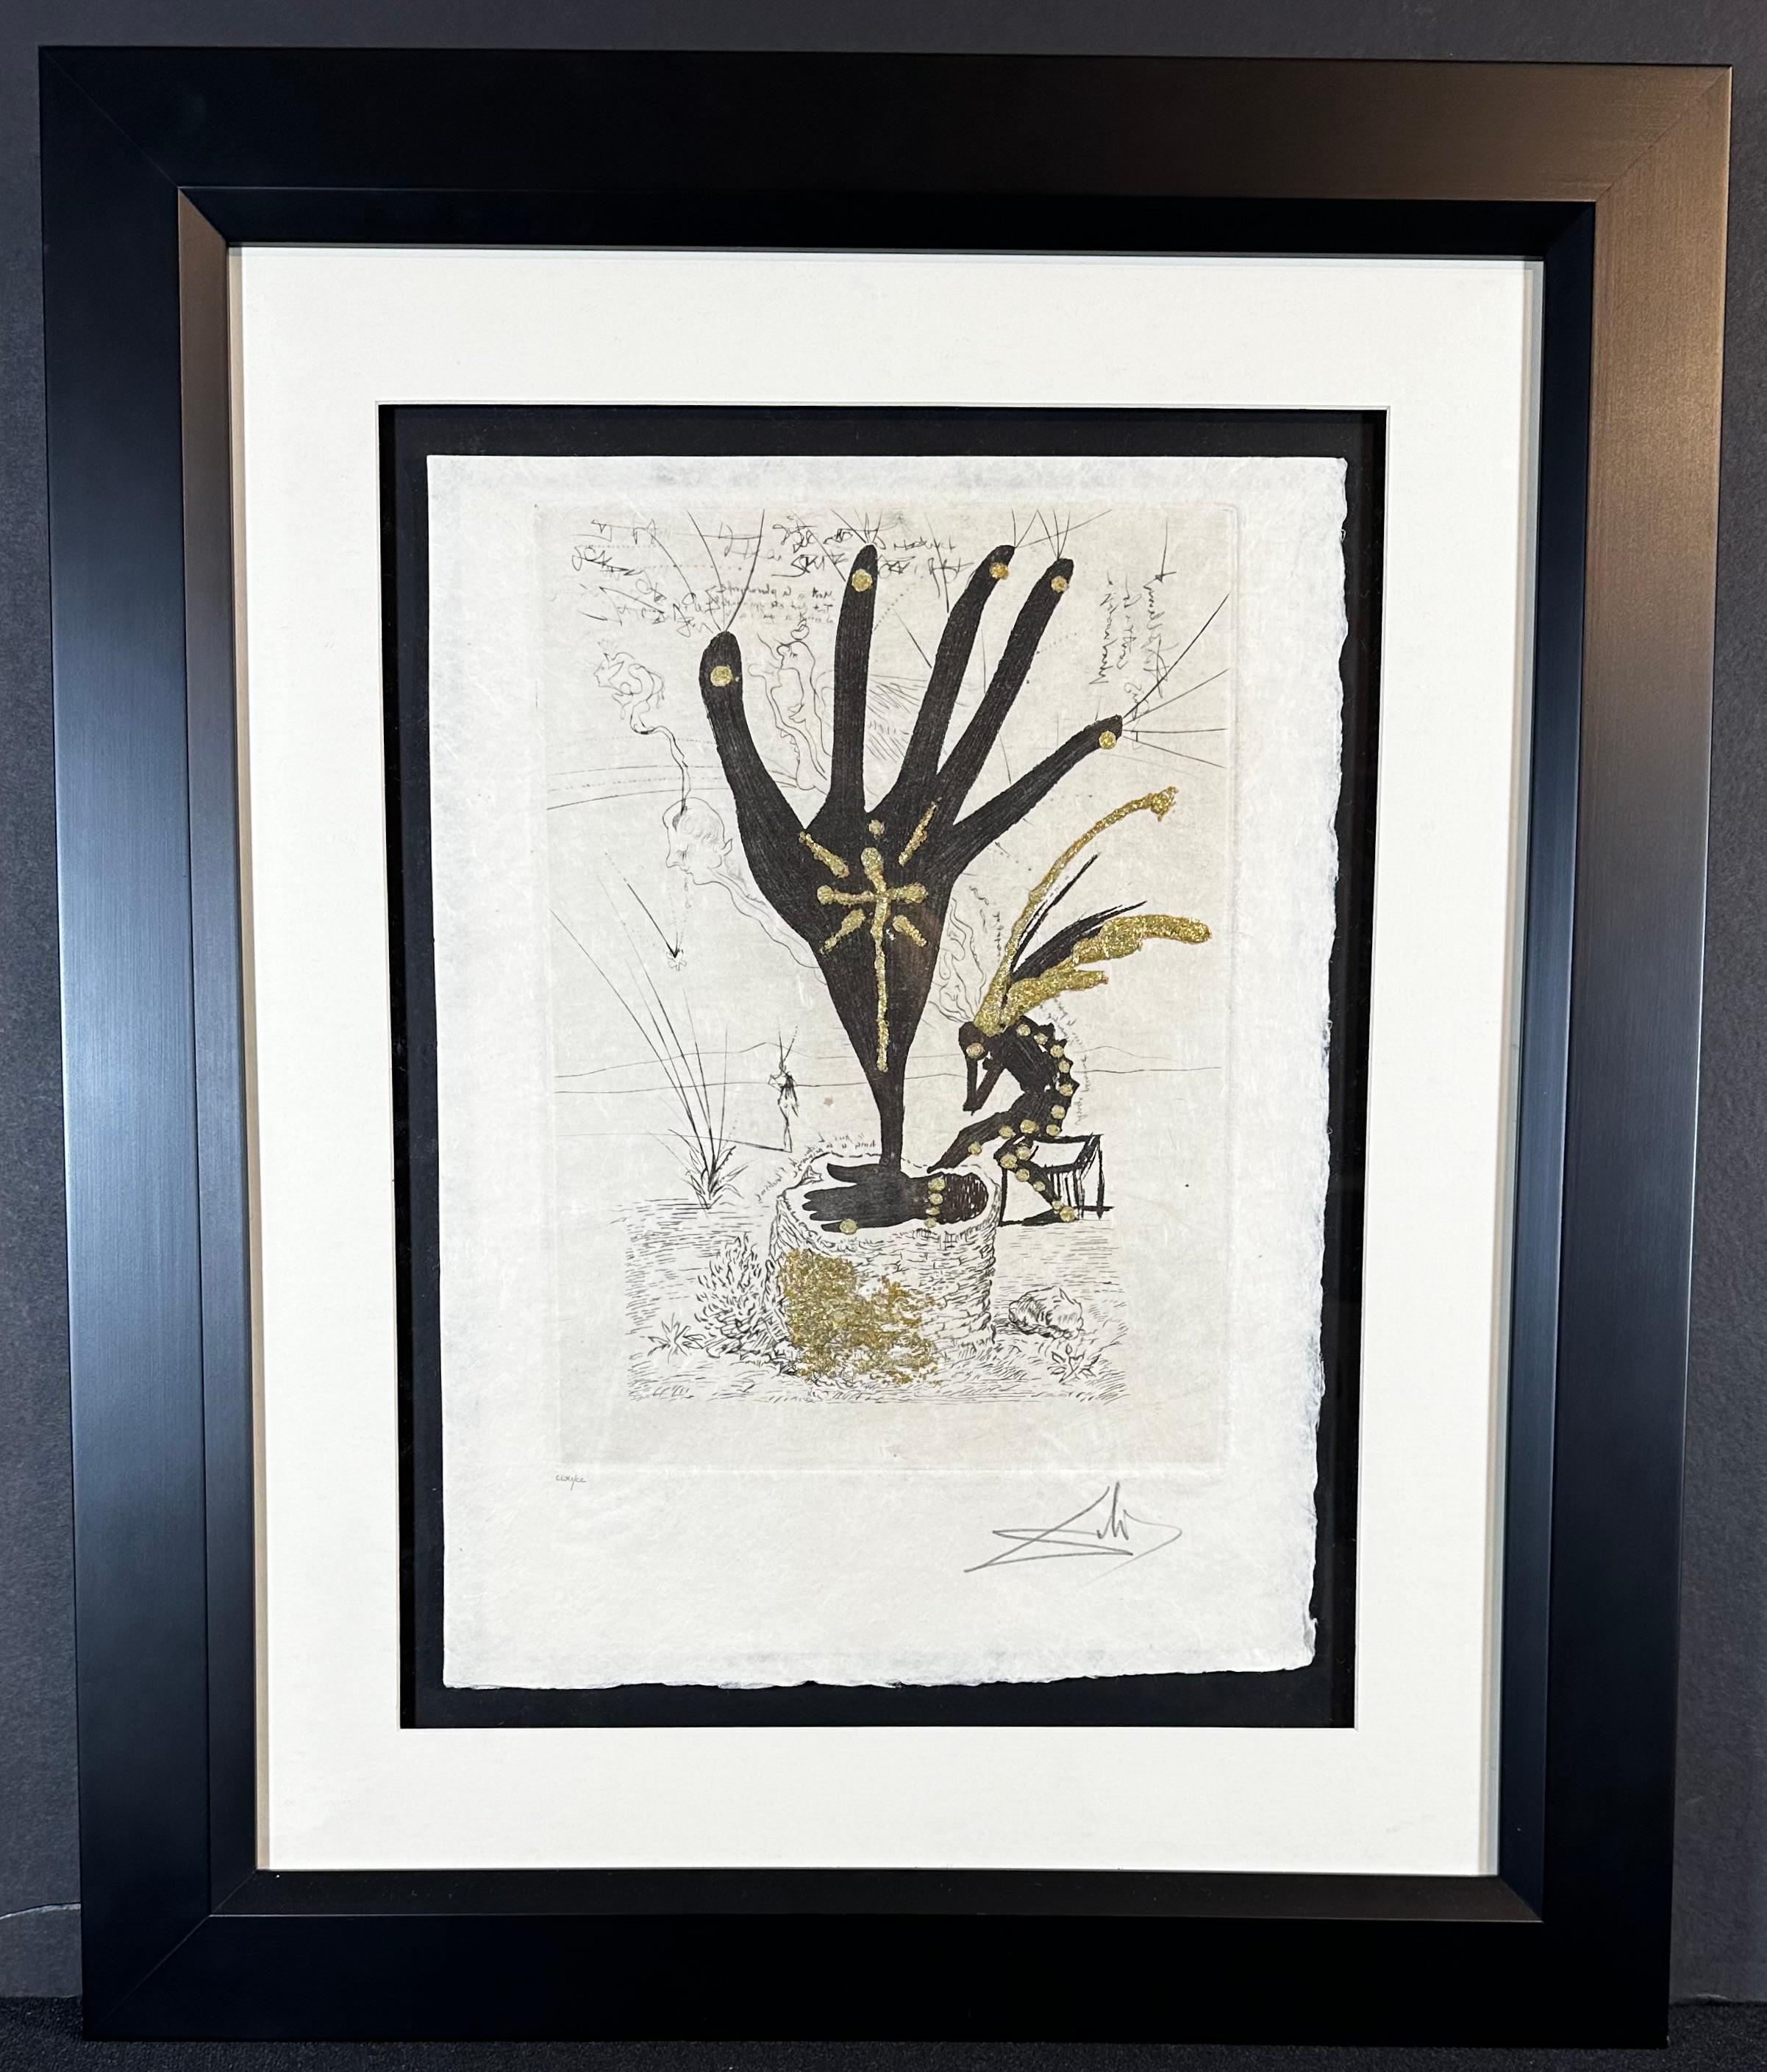 ARTIST: Salvador Dali

TITLE: Les Amours Jaunes Flower of Art

MEDIUM: Etching + Gold Flakes

SIGNED: Hand Signed 

EDITION NUMBER:  CLXII/CC

MEASUREMENTS: 11